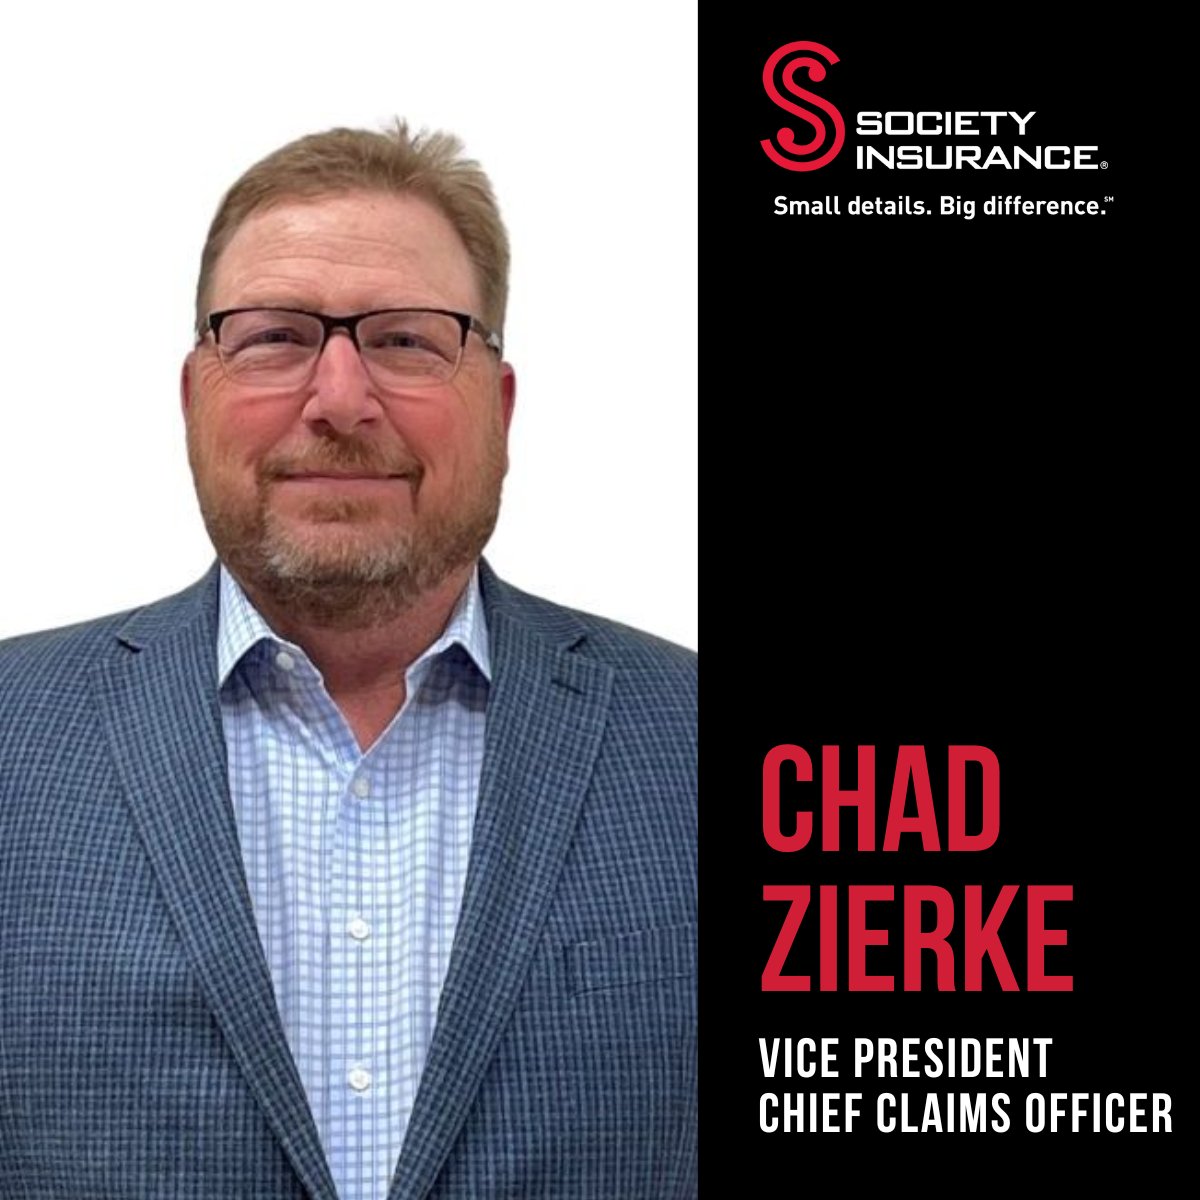 Join us in welcoming Chad Zierke, vice president-chief claims officer, to the Society Insurance executive team.